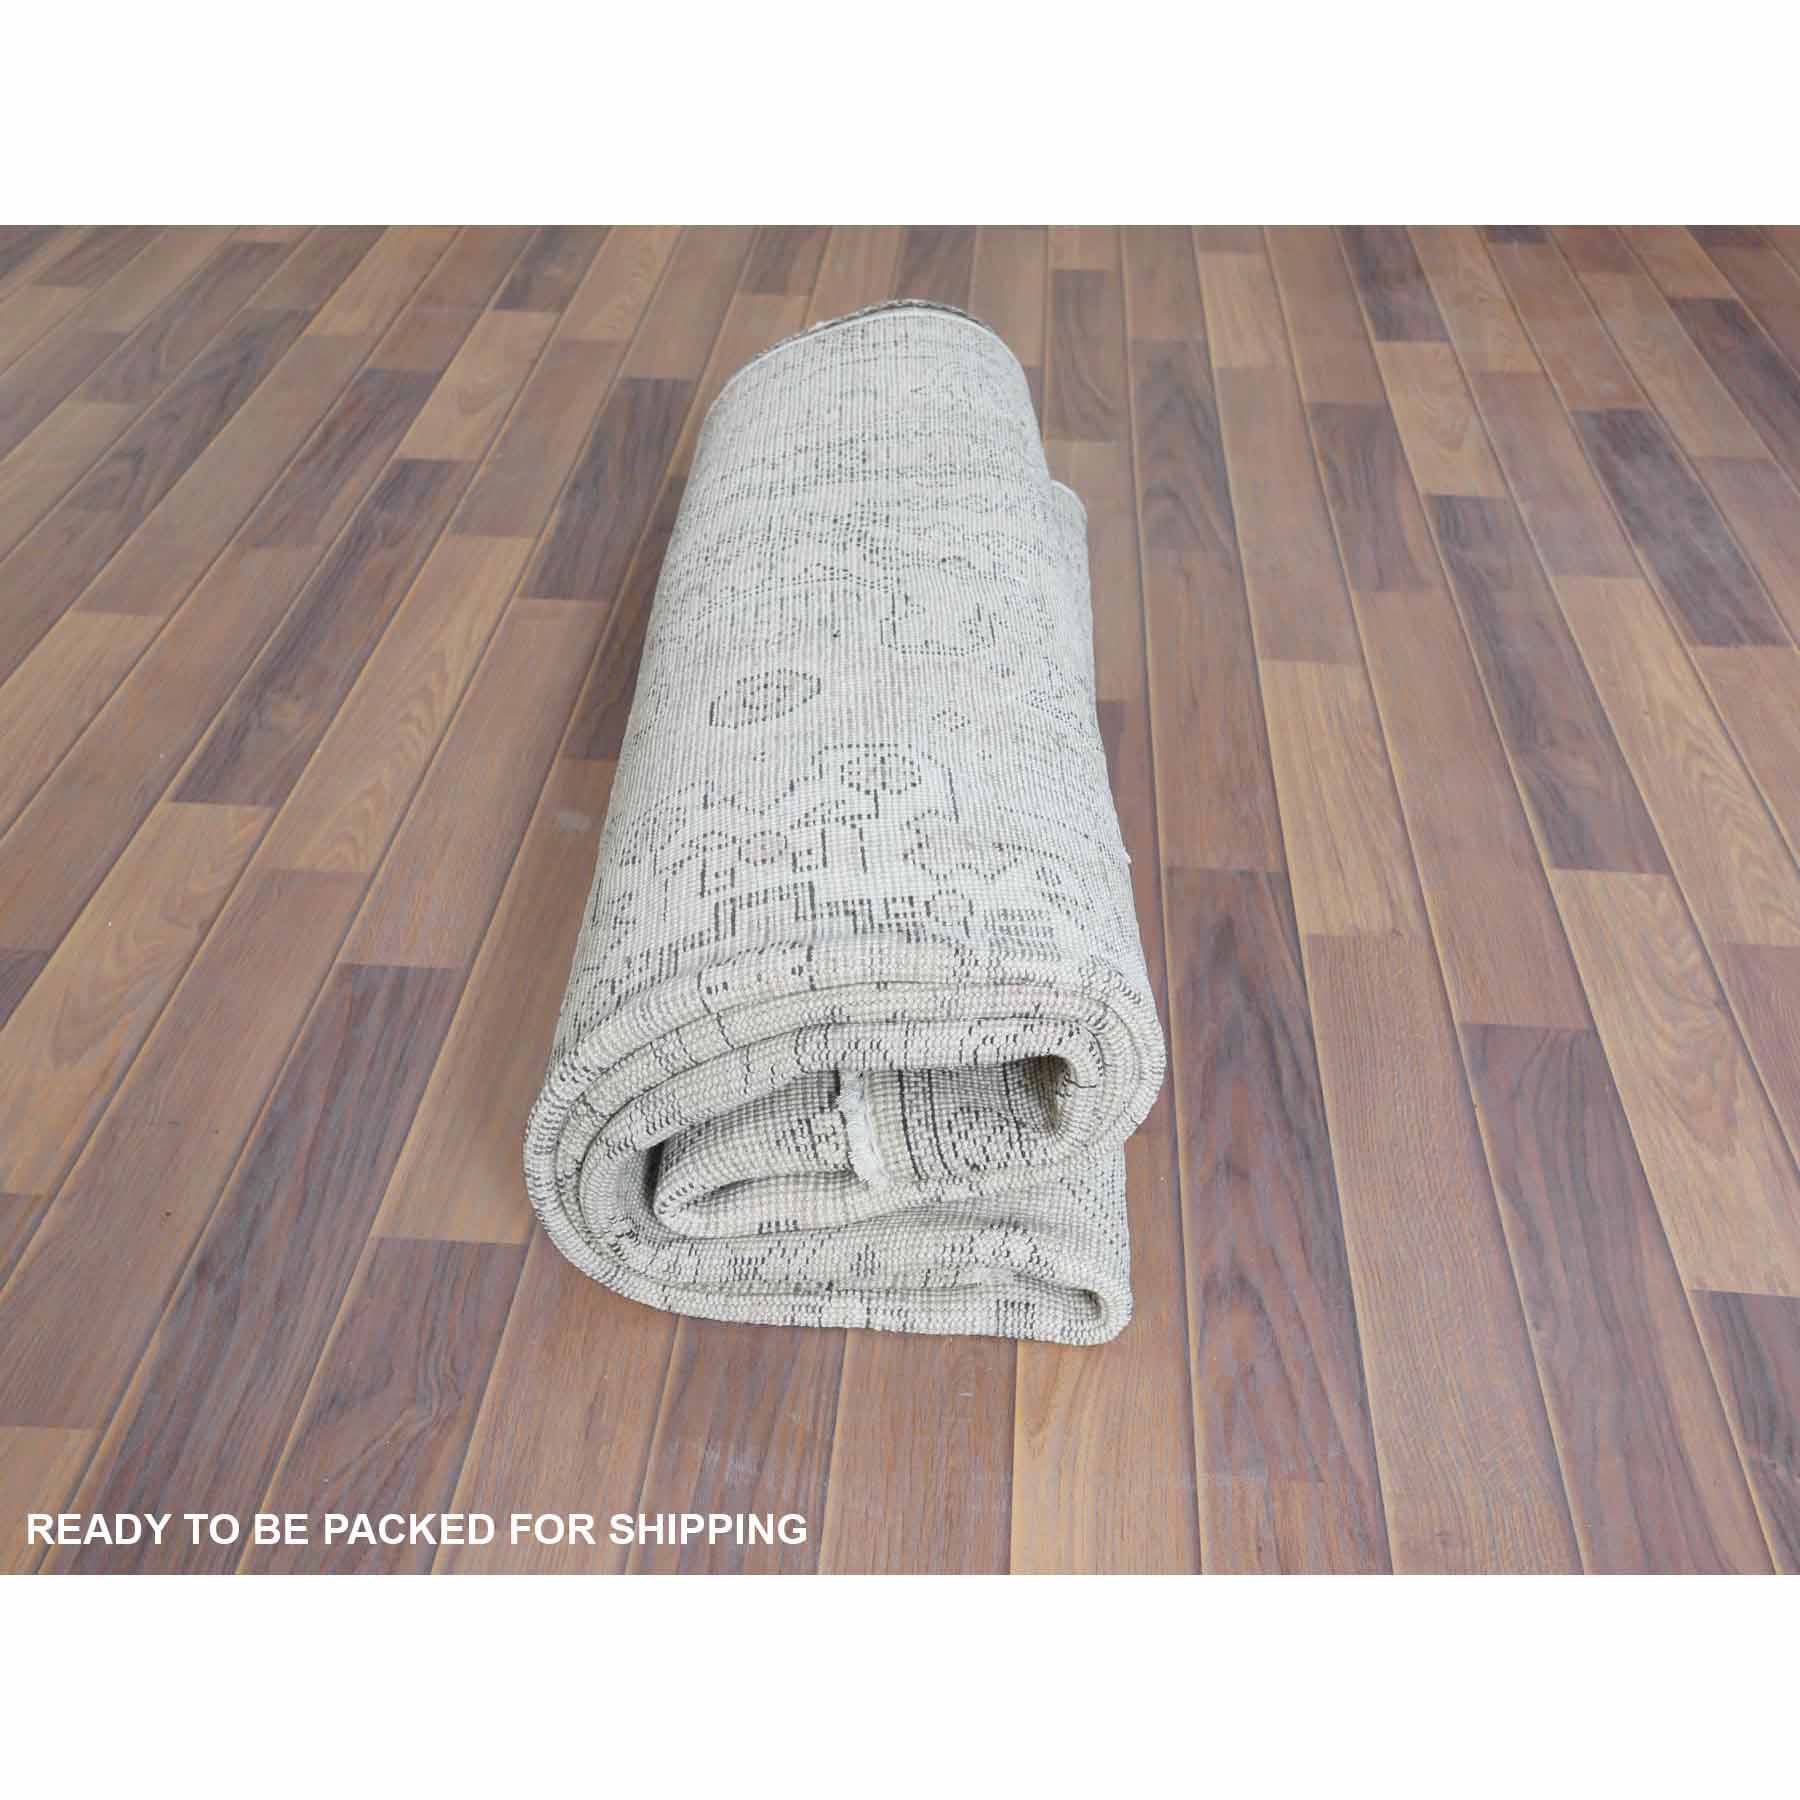 Overdyed-Vintage-Hand-Knotted-Rug-307910